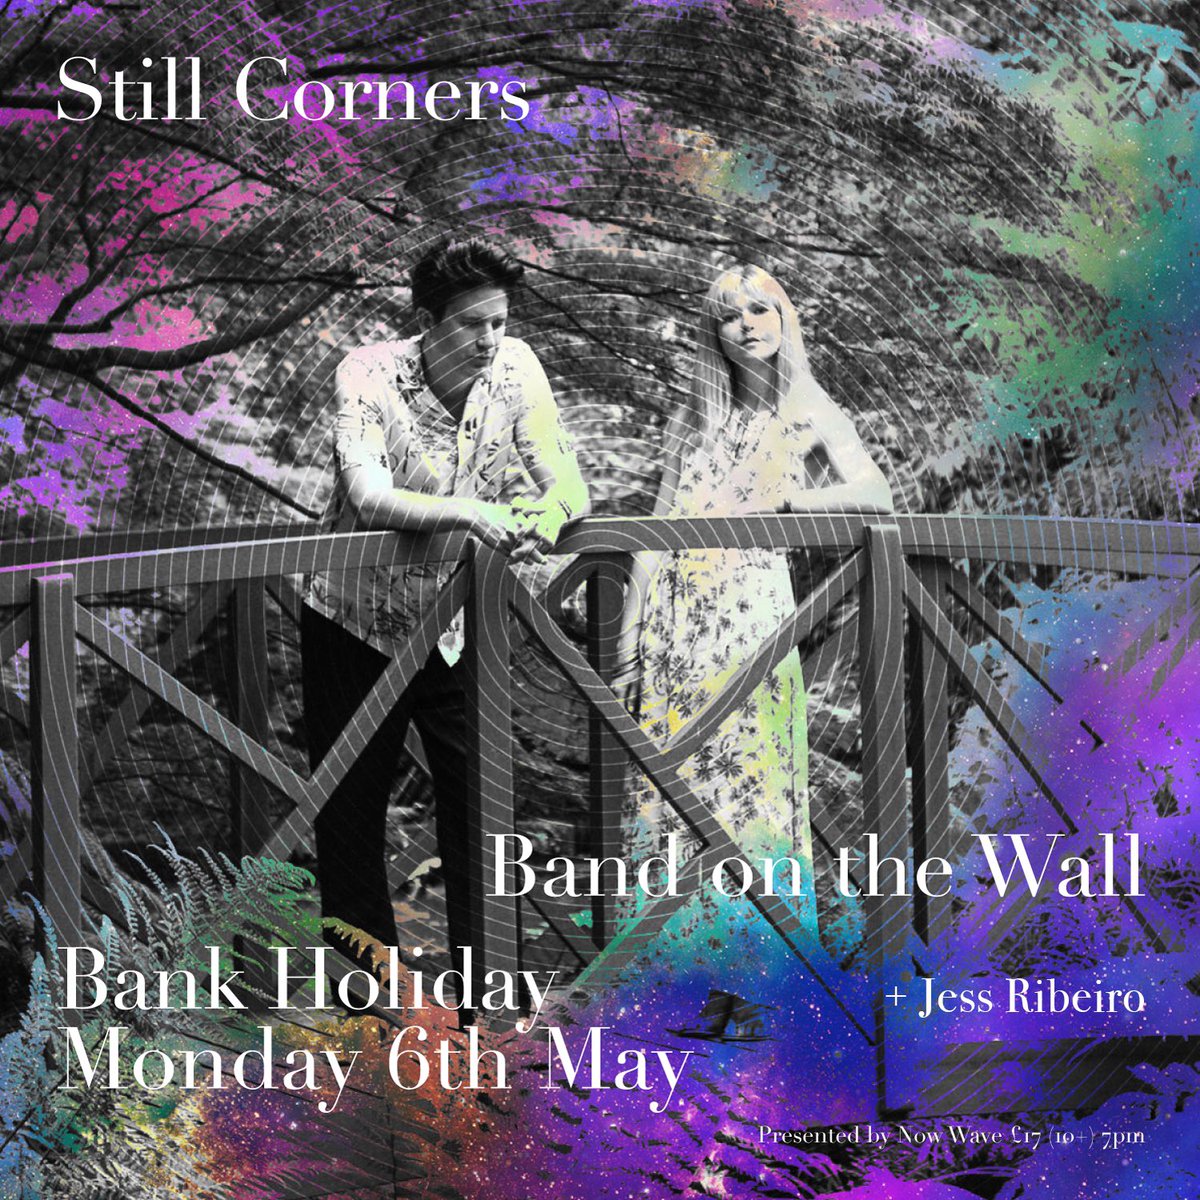 Stage times for this evening at @bandonthewall 

Doors - 7:30pm
Jess Ribeiro - 8pm
@StillCorners - 9pm

Some tickets available otd.